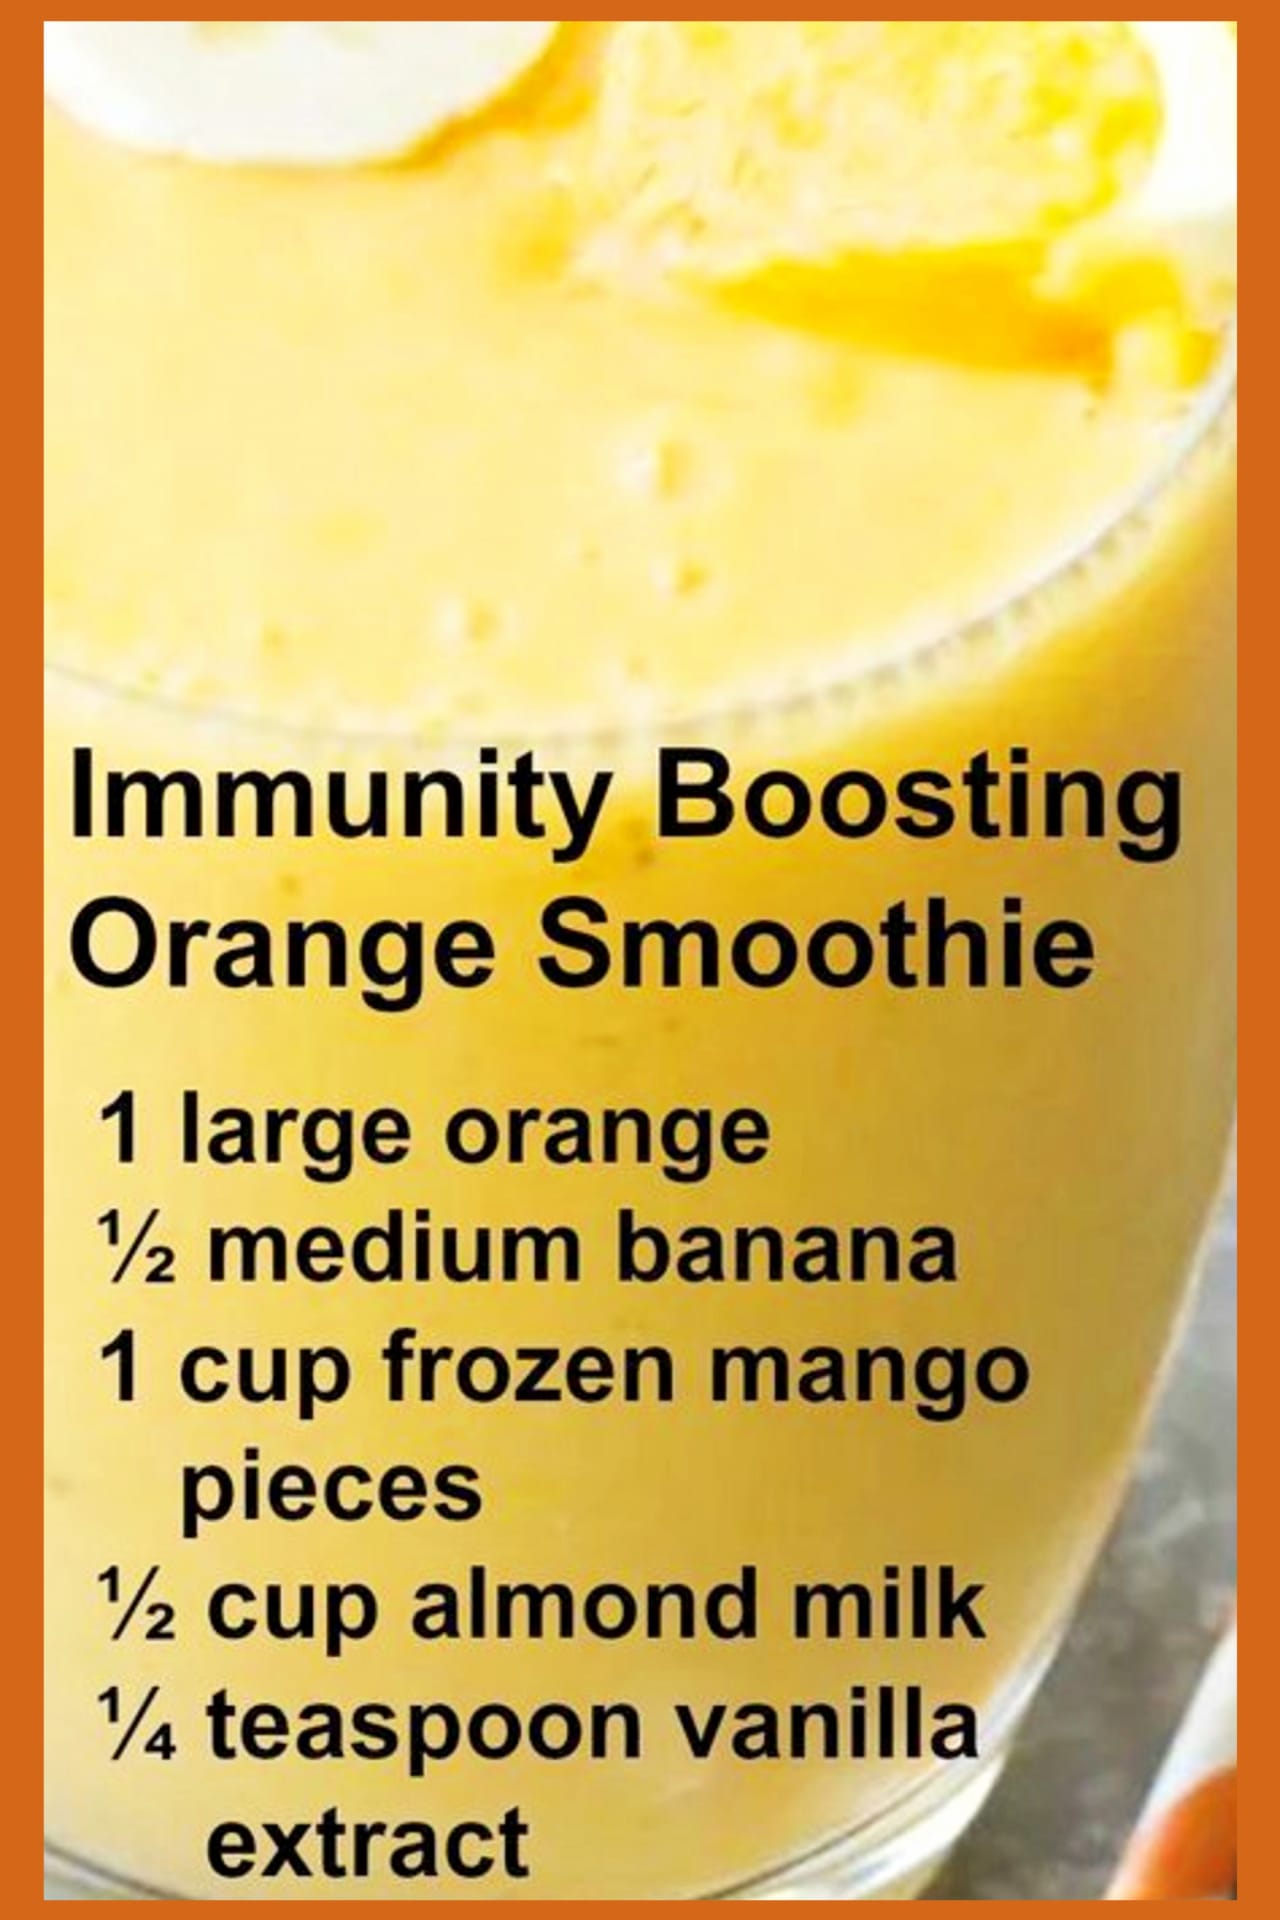 Easy and healthy smoothies recipes for breakfast - simple immune boosting orange smoothie recipe with banana and mango